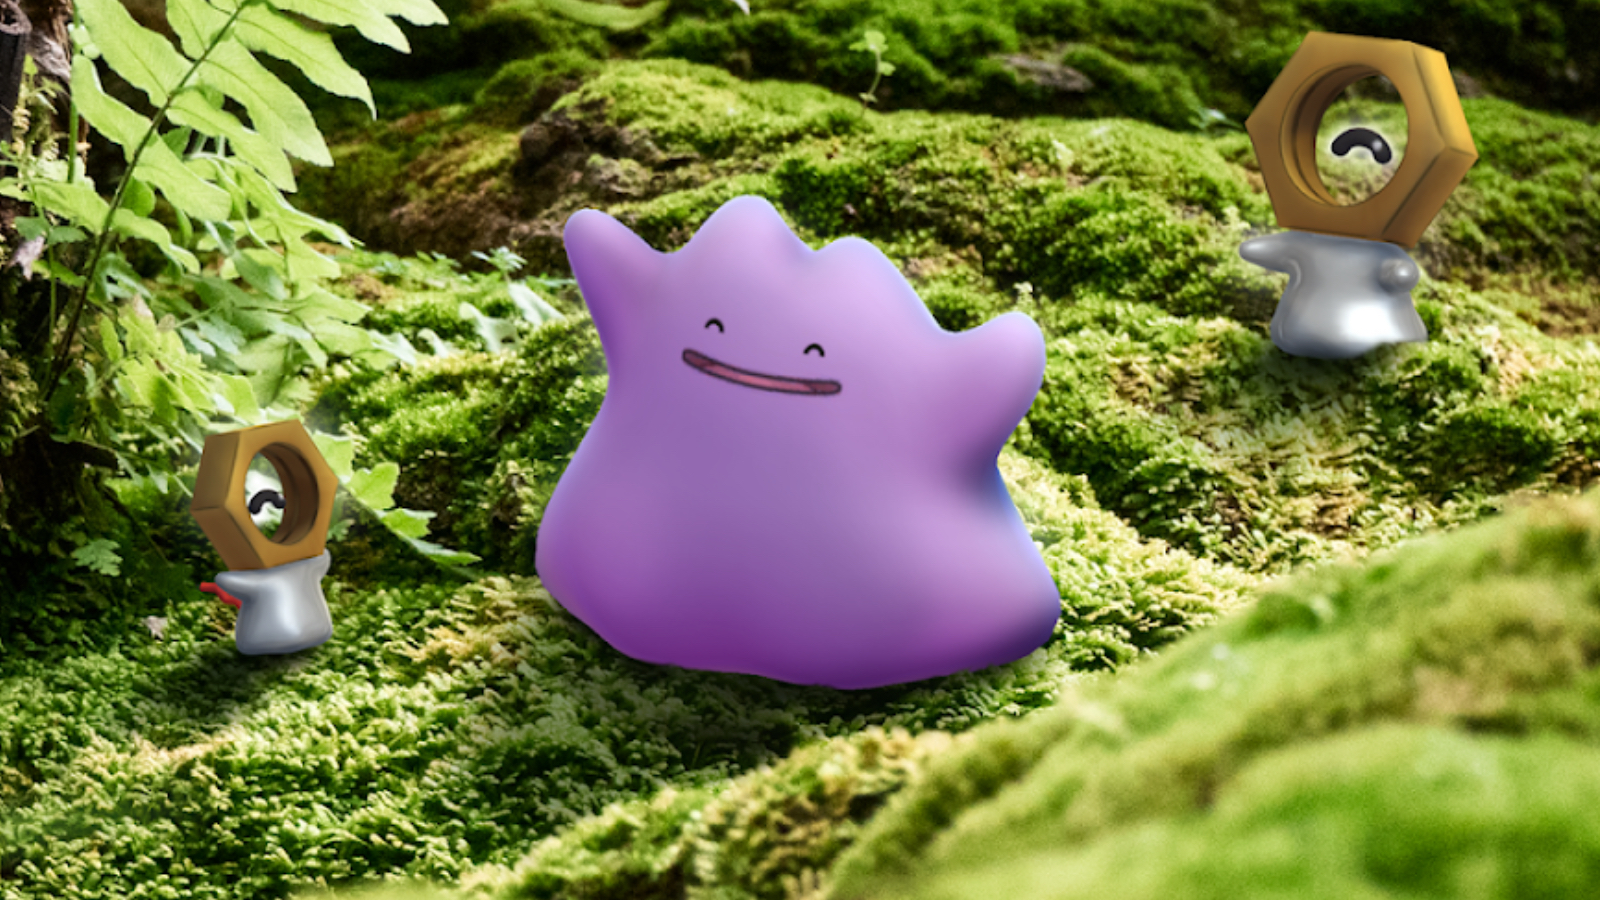 Pokémon GO on X: Which one of these Ditto are you feeling like